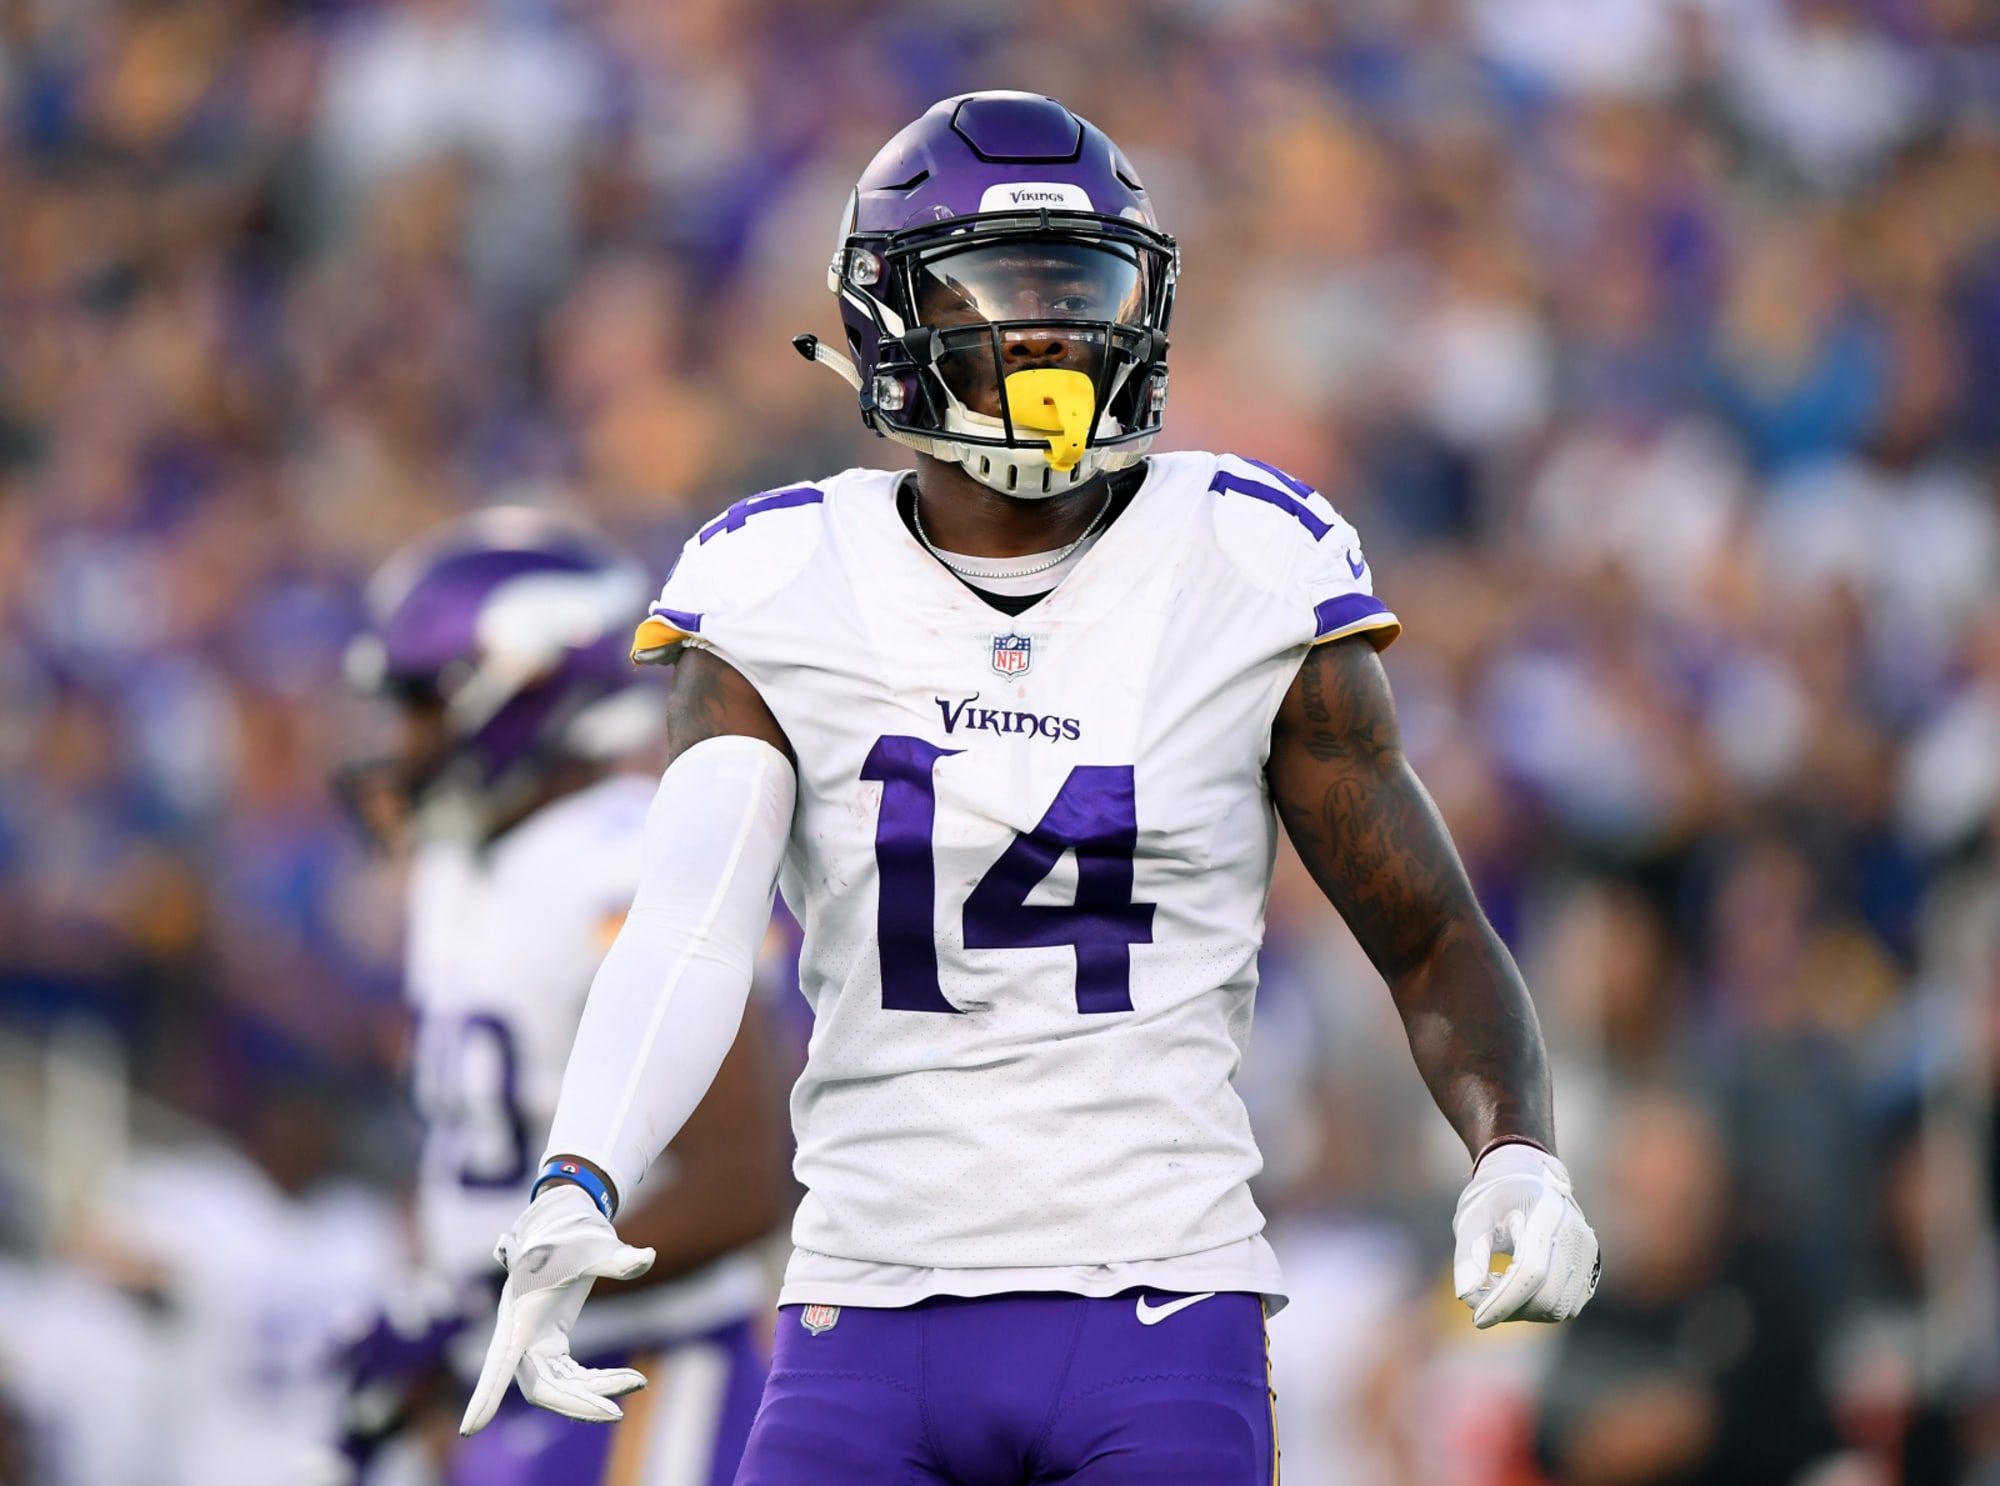 Stefon Diggs' younger brother could play for the Vikings in 2019